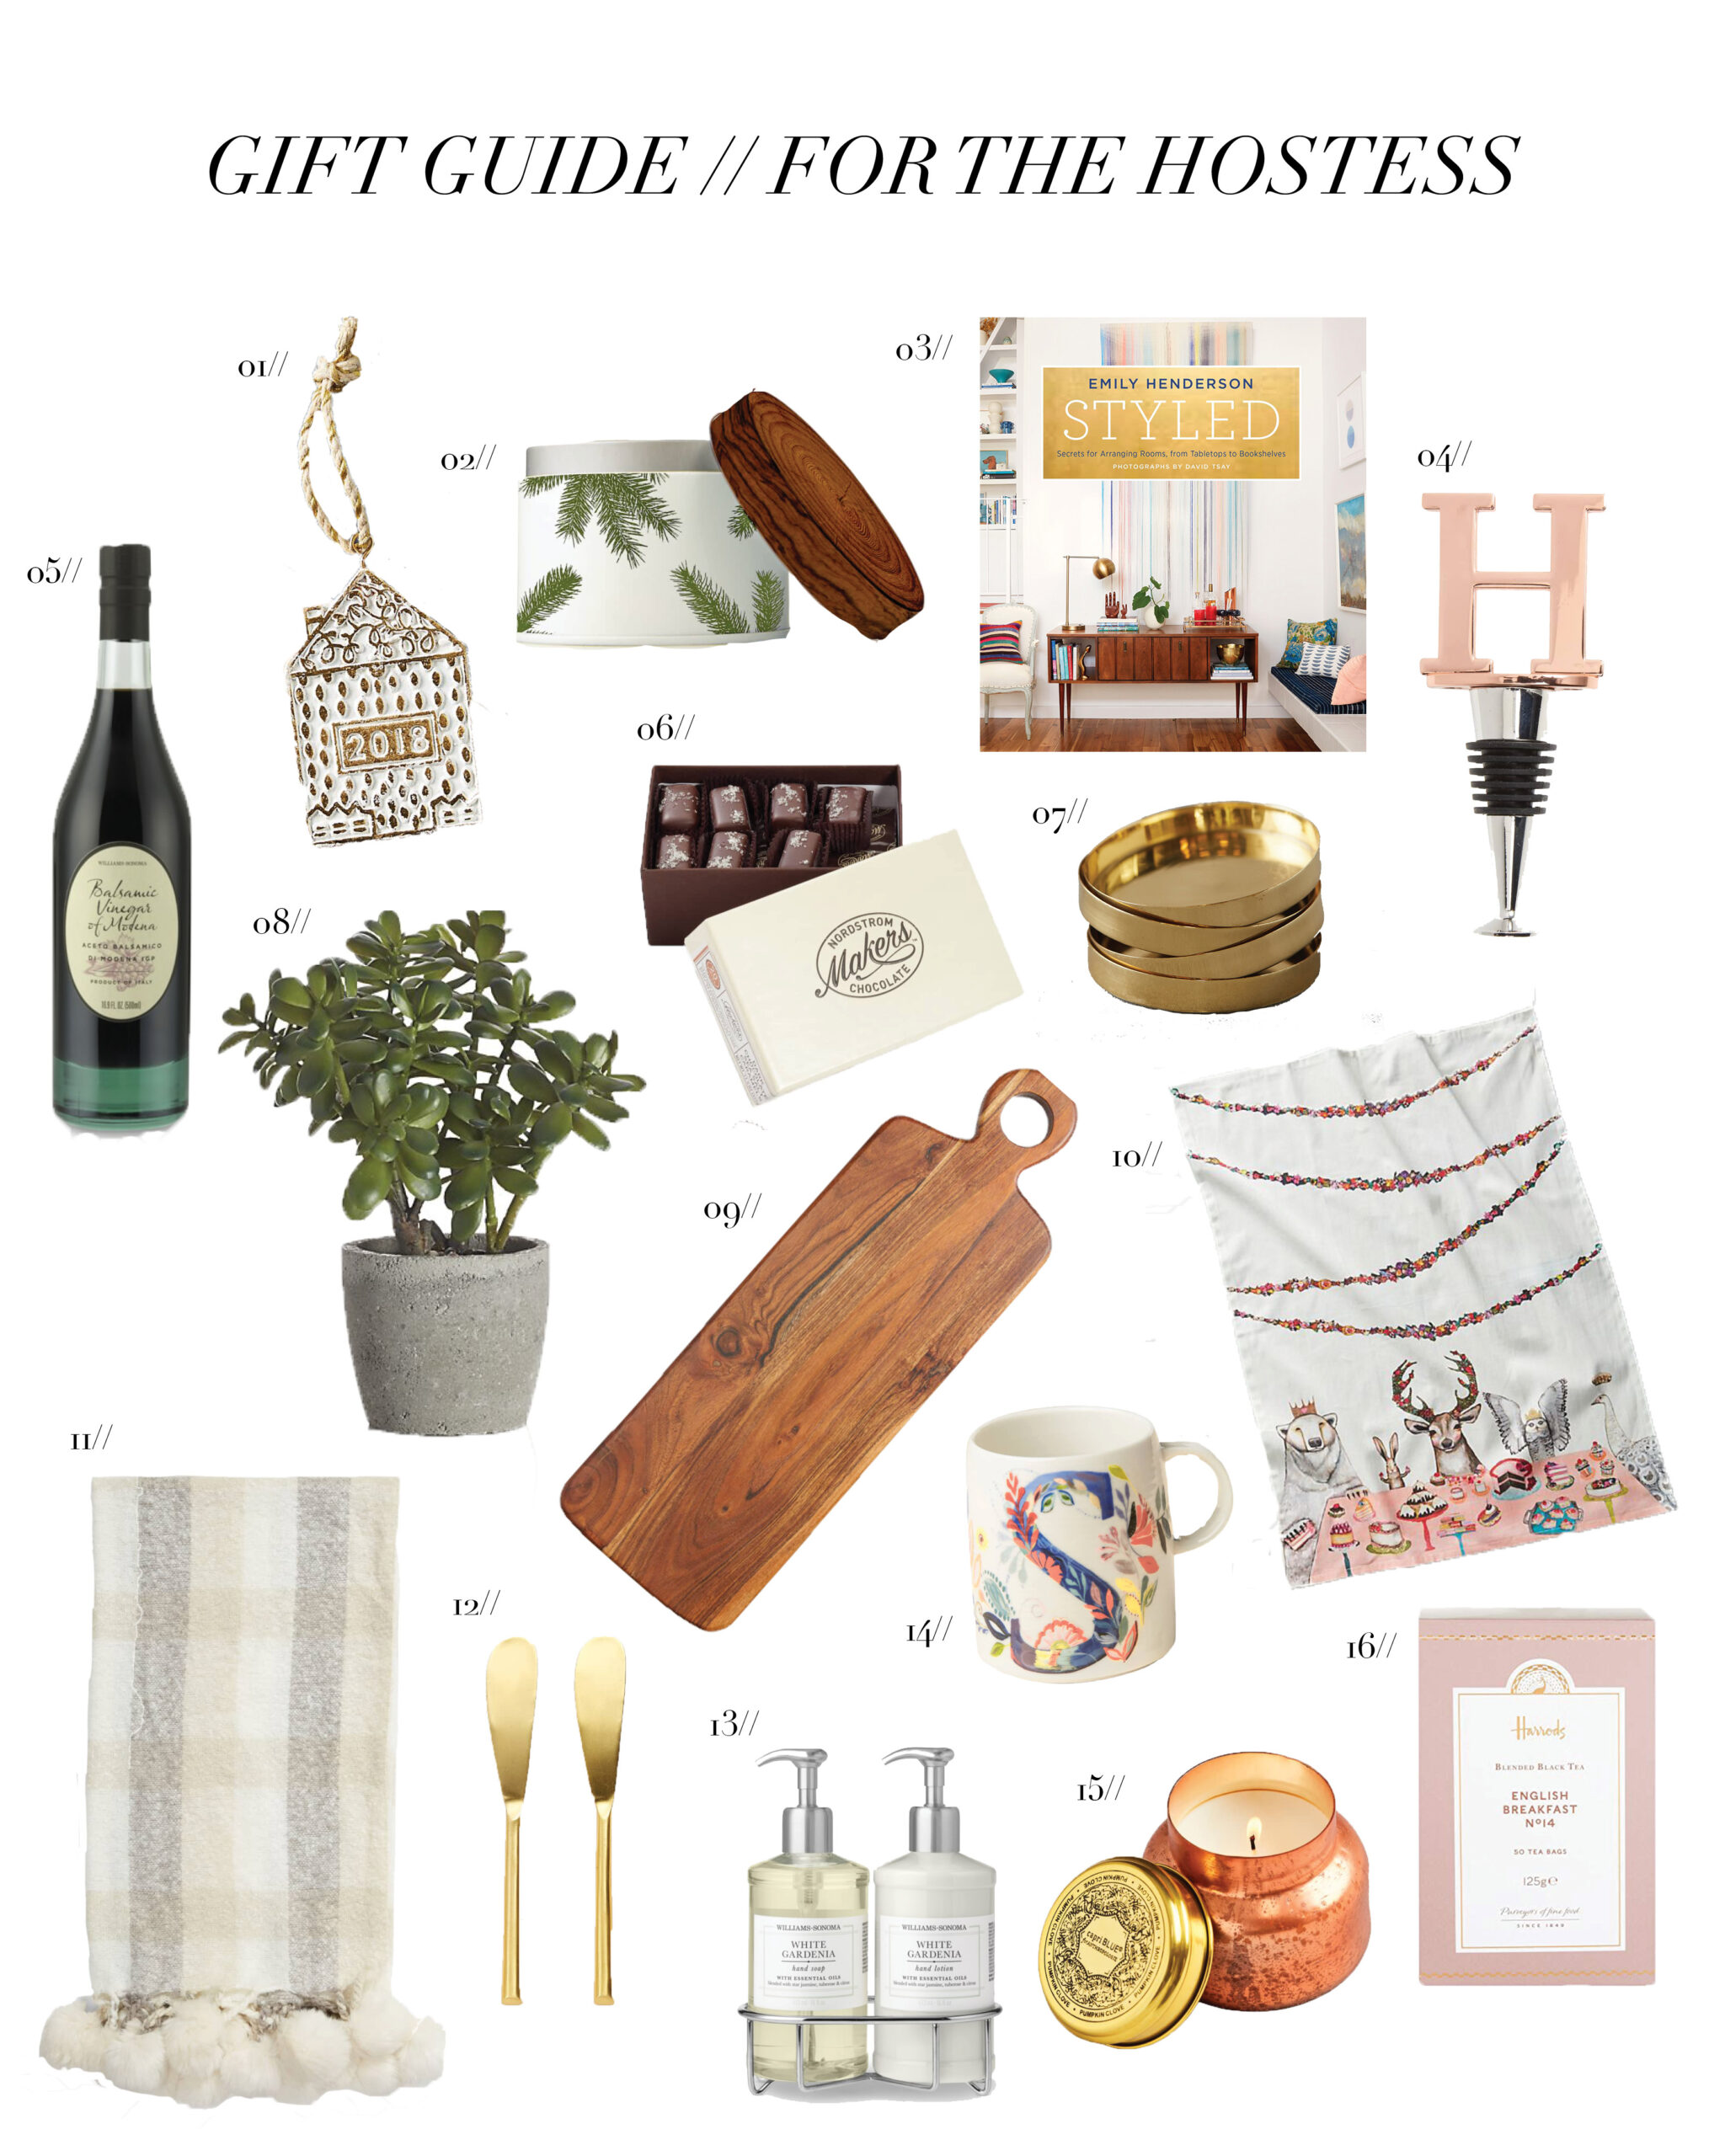 Thoughtful Hostess Gifts: 15 Gift Ideas - The Well Dressed Life